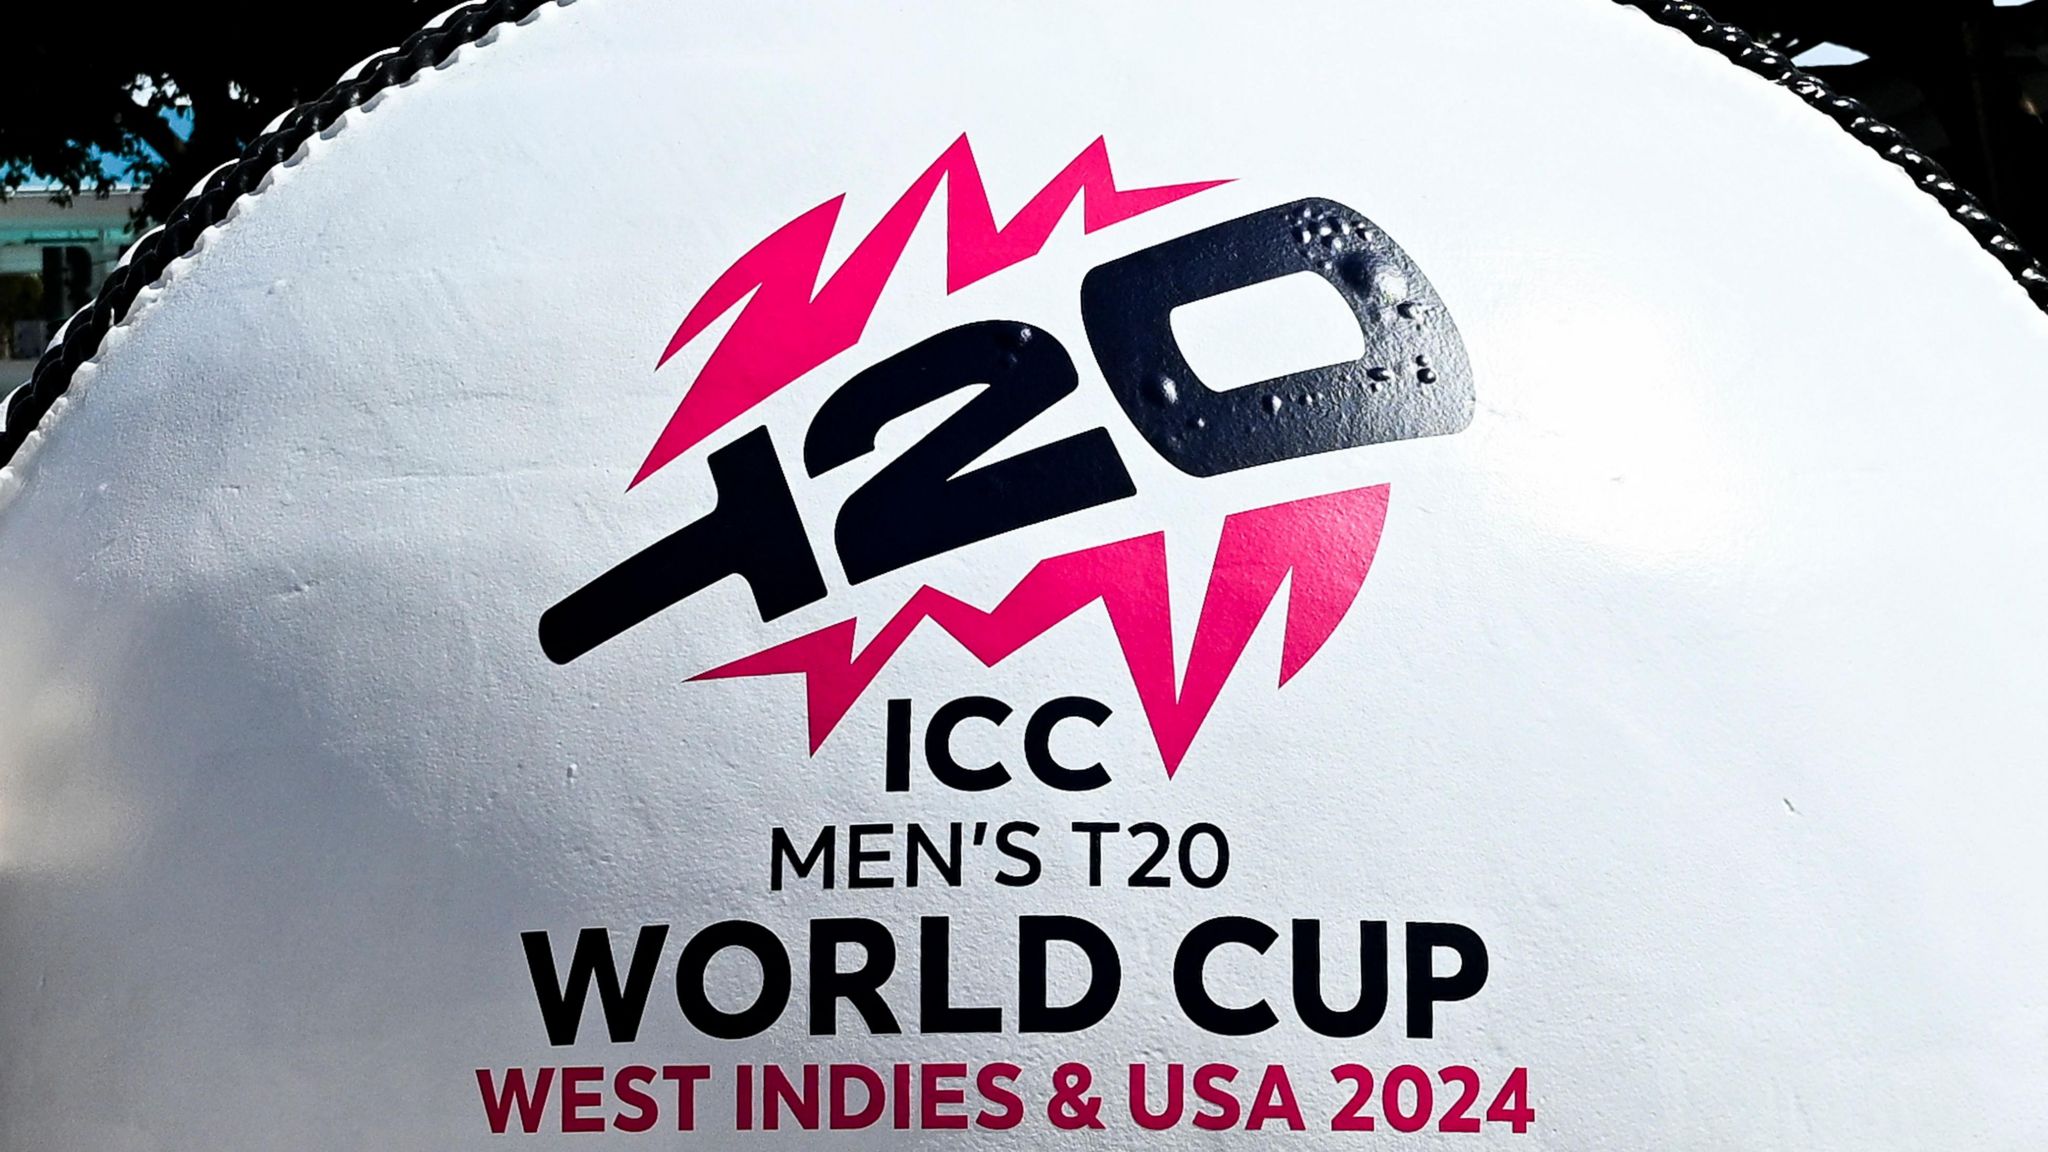 ICC Men's T20 World Cup Format, Teams, Groups, Rules and Previous